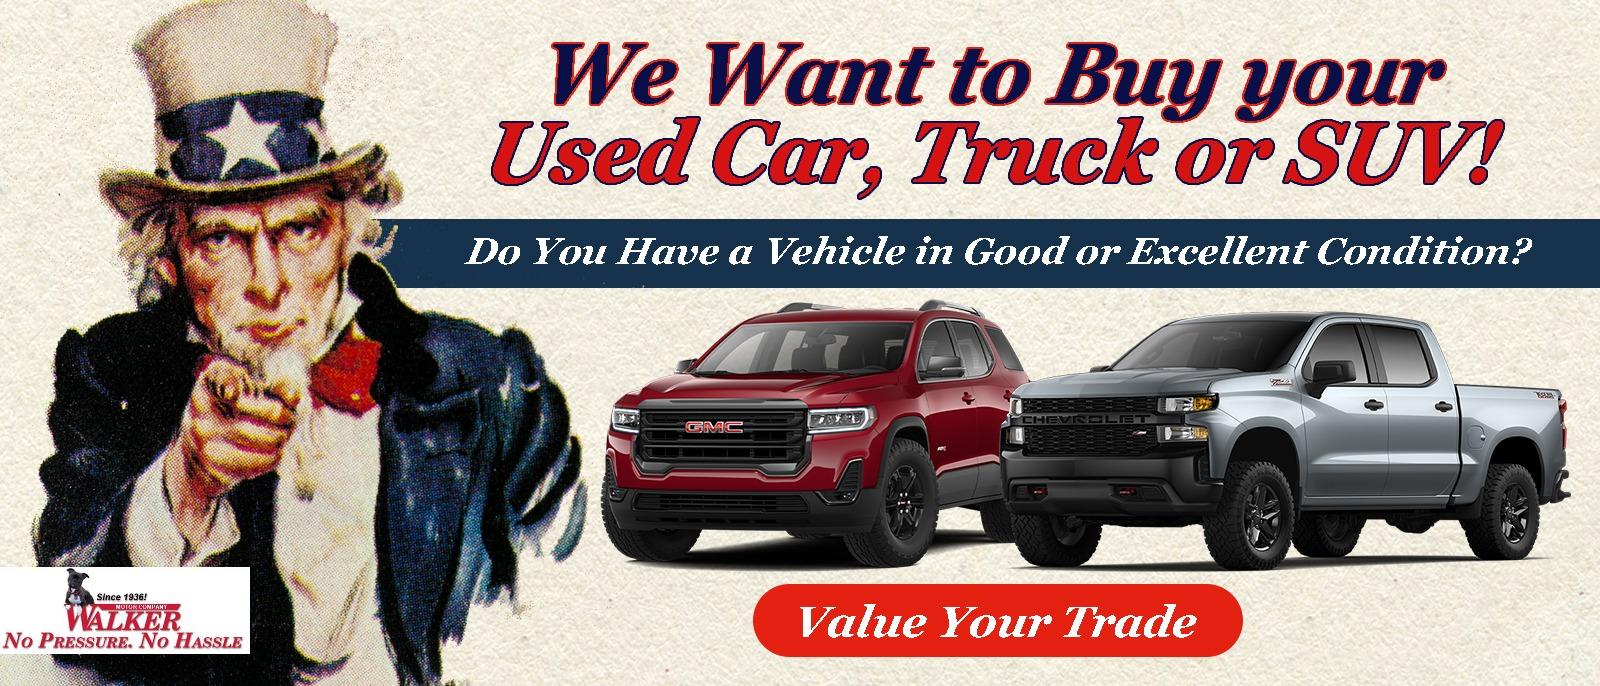 We Want to Buy Your Used Car, Truck or SUV!